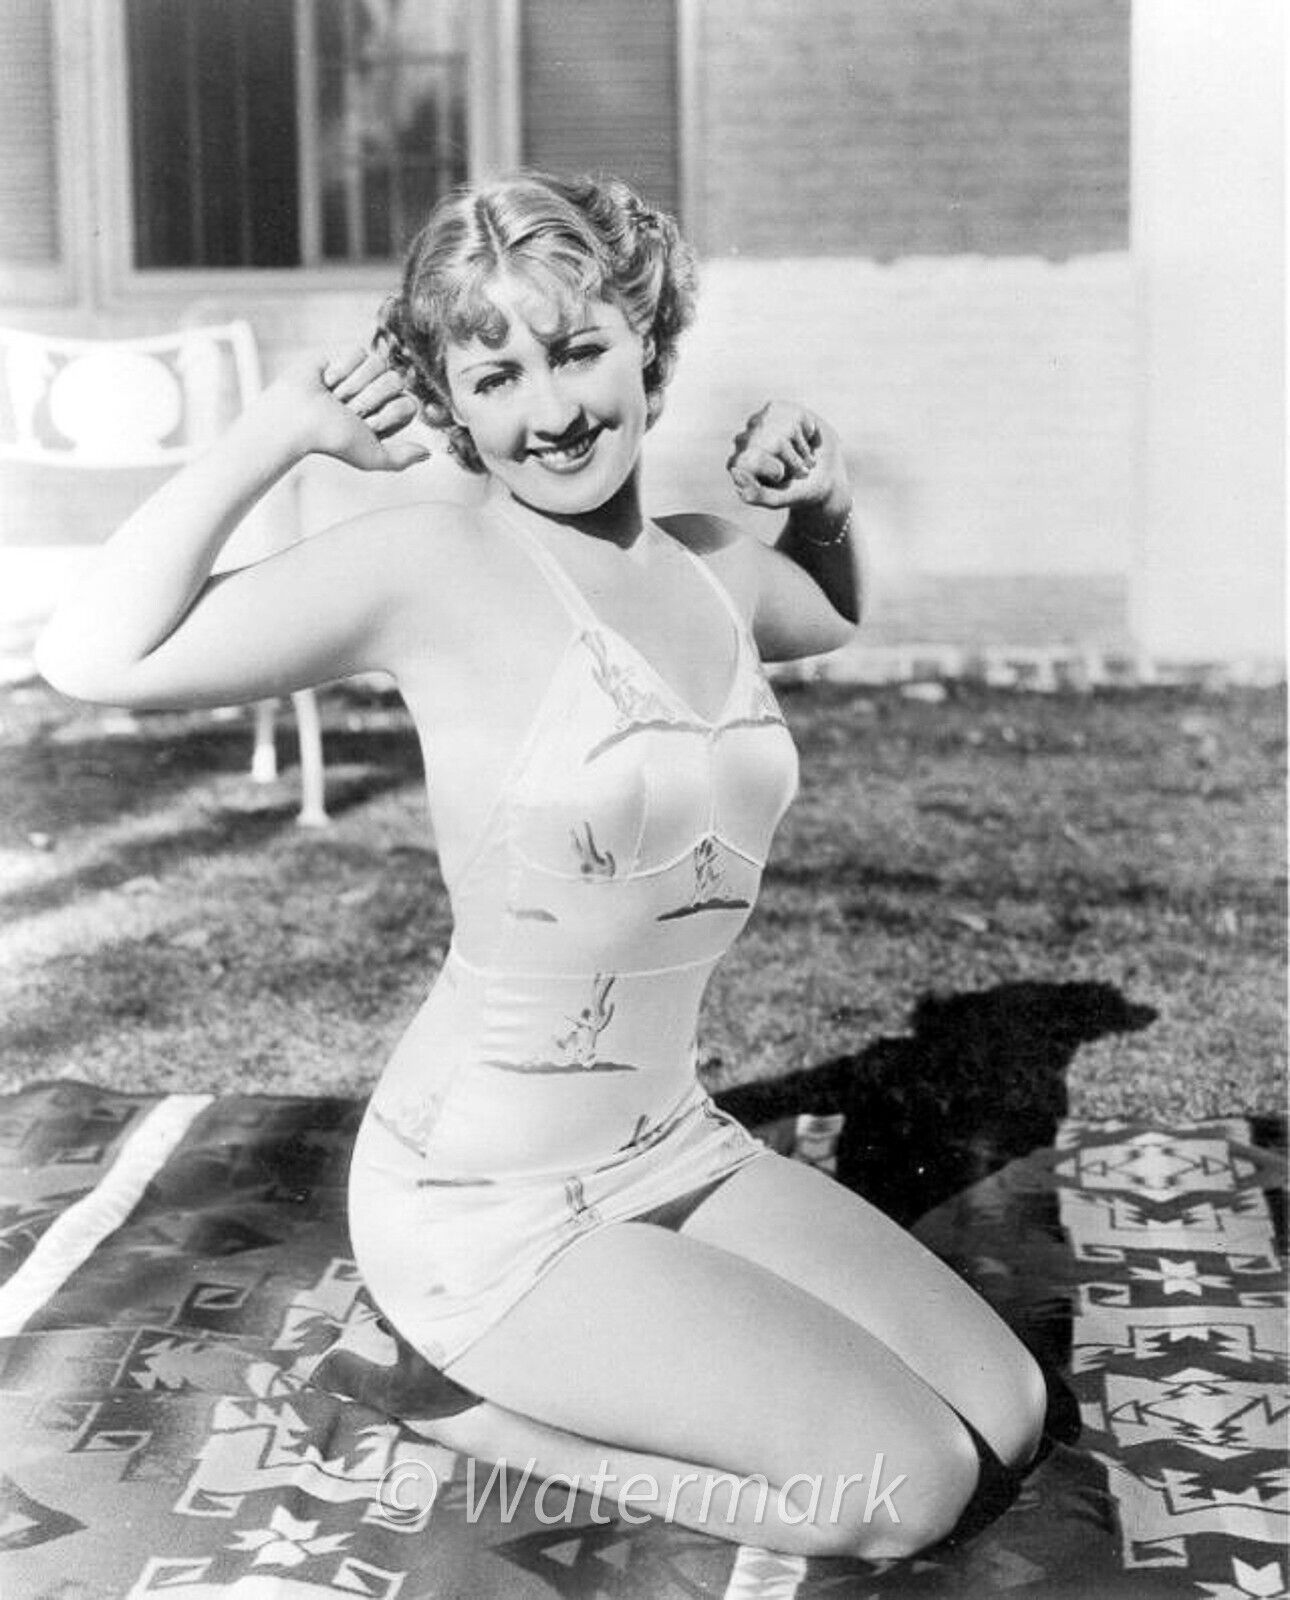 VINTAGE American actress Joan Blondell  -  1920s-1930s - 16x20 PHOTO